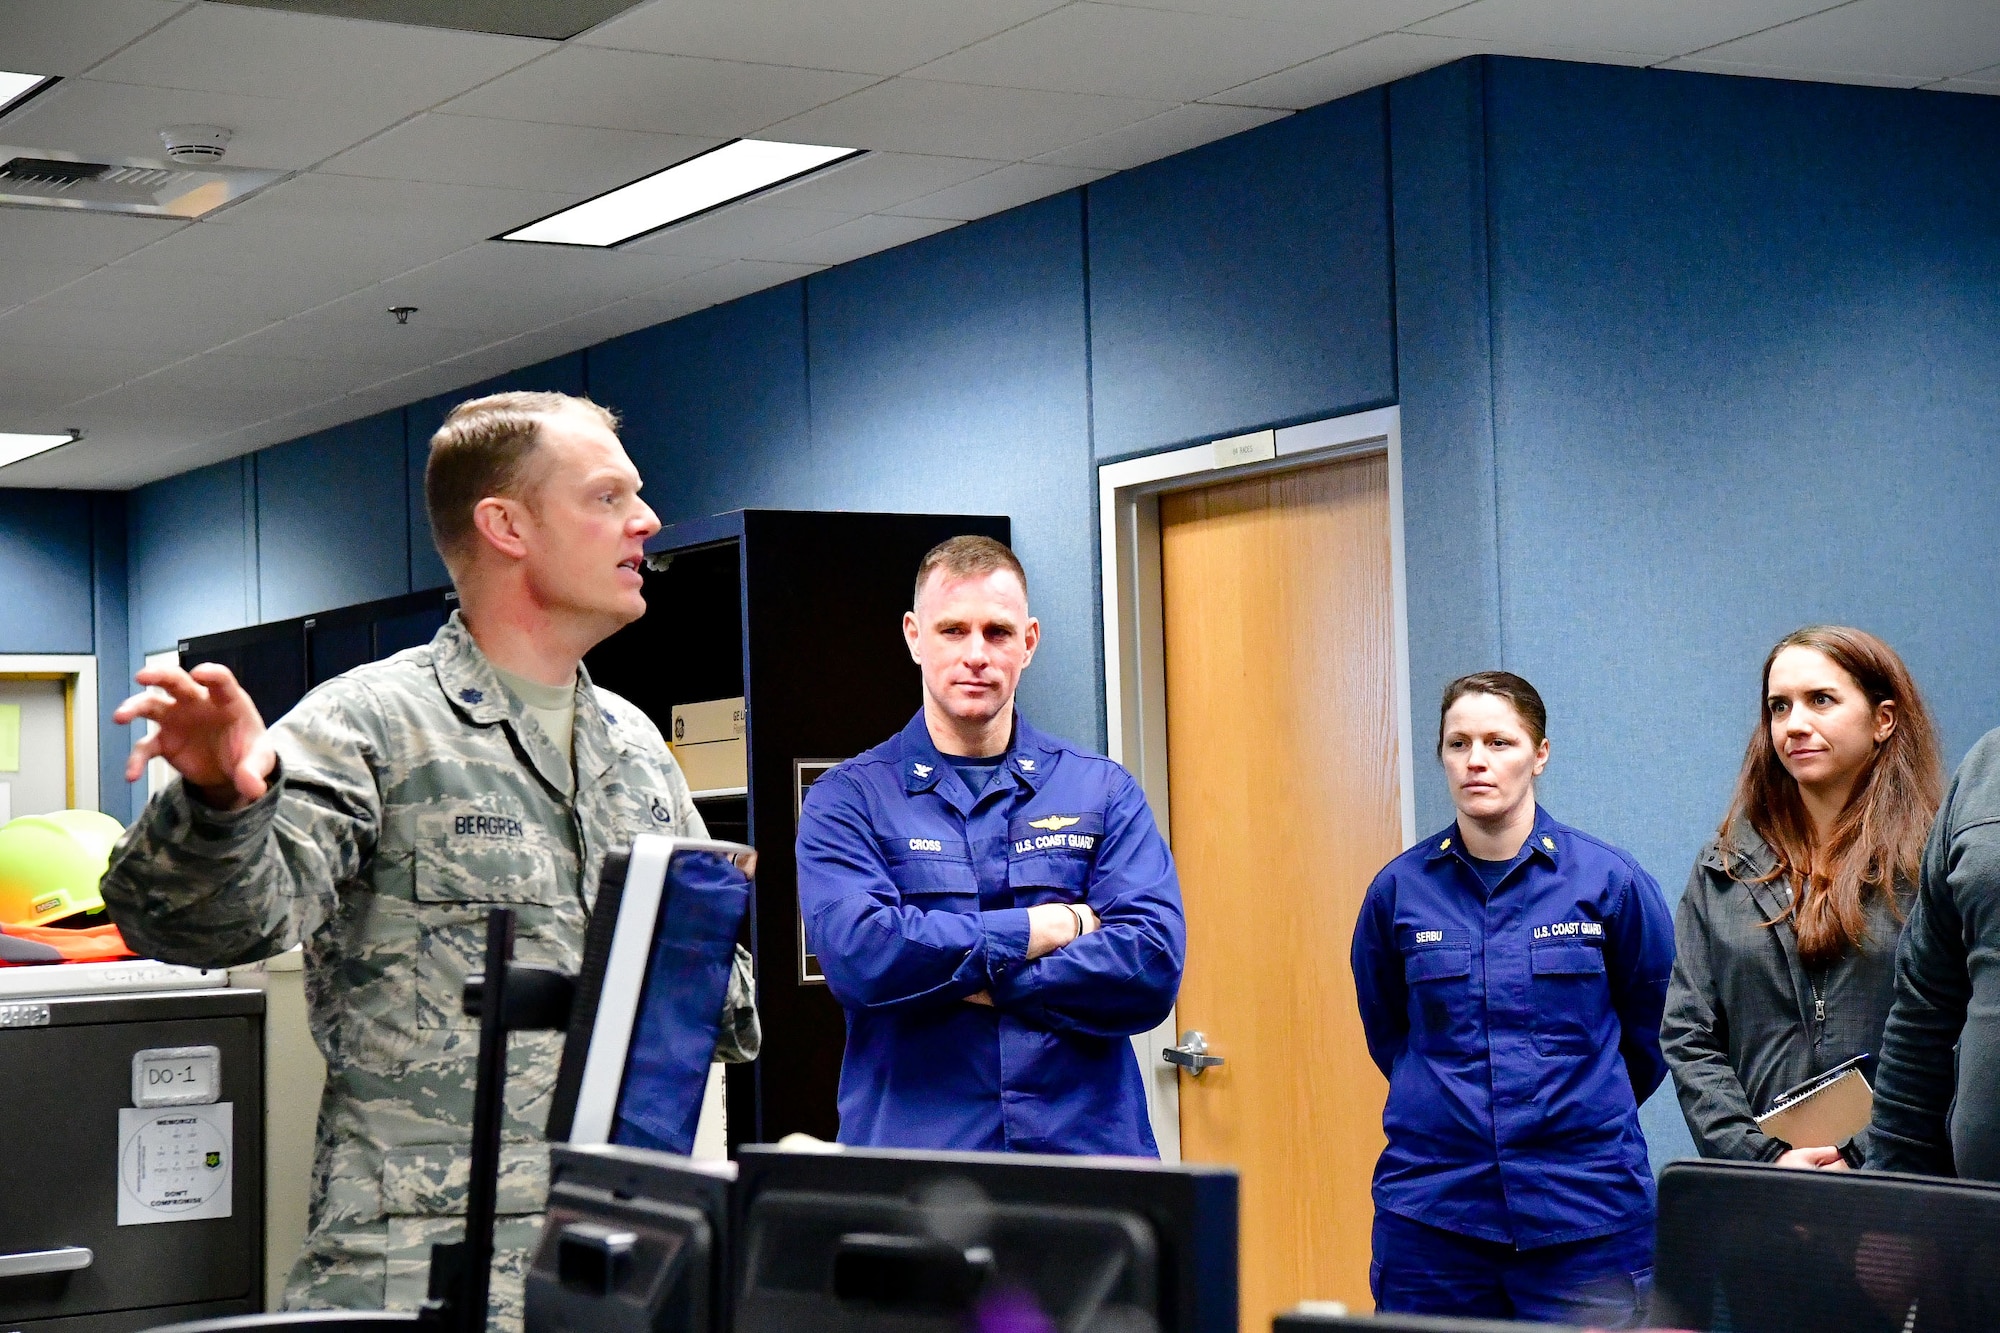 Lt. Col. Brian Bergren, 225th Air Defense Squadron director of operations, discusses lessons learned from Hurricane Harvey recovery efforts with Capt. Sean Cross, U.S. Coast Guard 13th District chief of incident management, and Lt. Cmdr. Brook Serbu, U.S. Coast Guard 13th District command center chief.